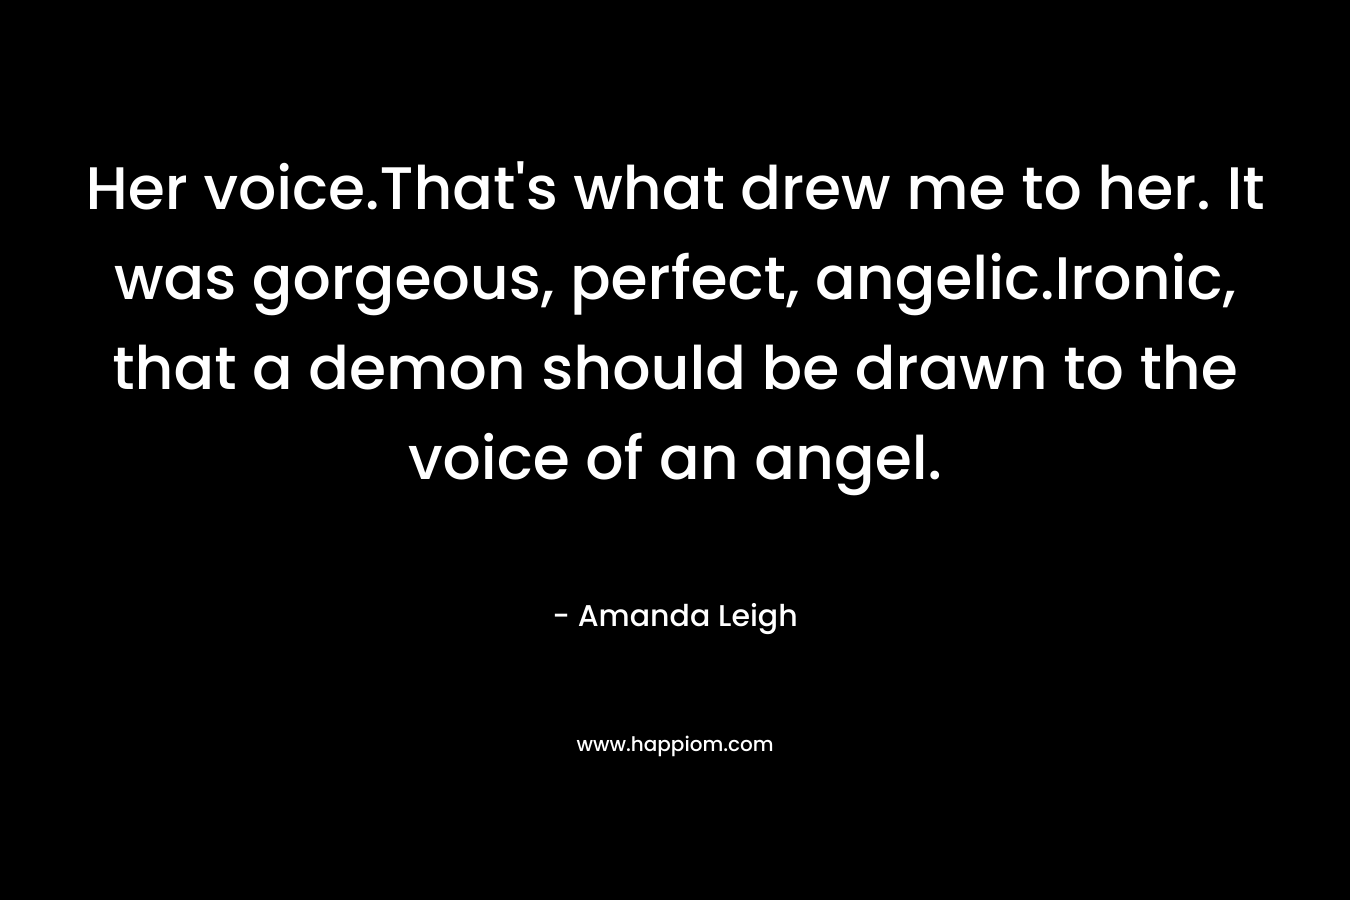 Her voice.That's what drew me to her. It was gorgeous, perfect, angelic.Ironic, that a demon should be drawn to the voice of an angel.